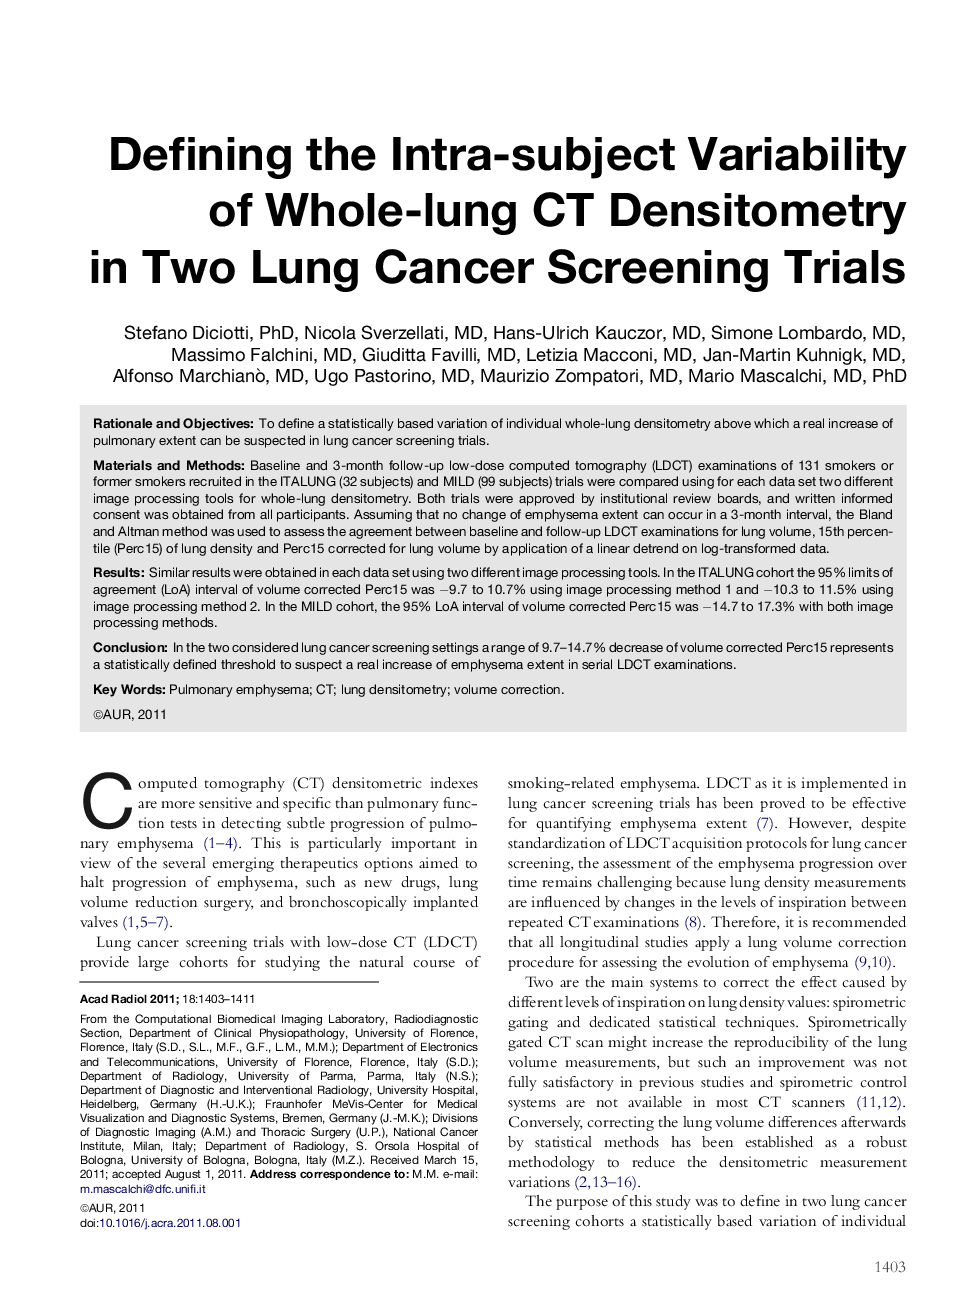 Defining the Intra-subject Variability of Whole-lung CT Densitometry in Two Lung Cancer Screening Trials